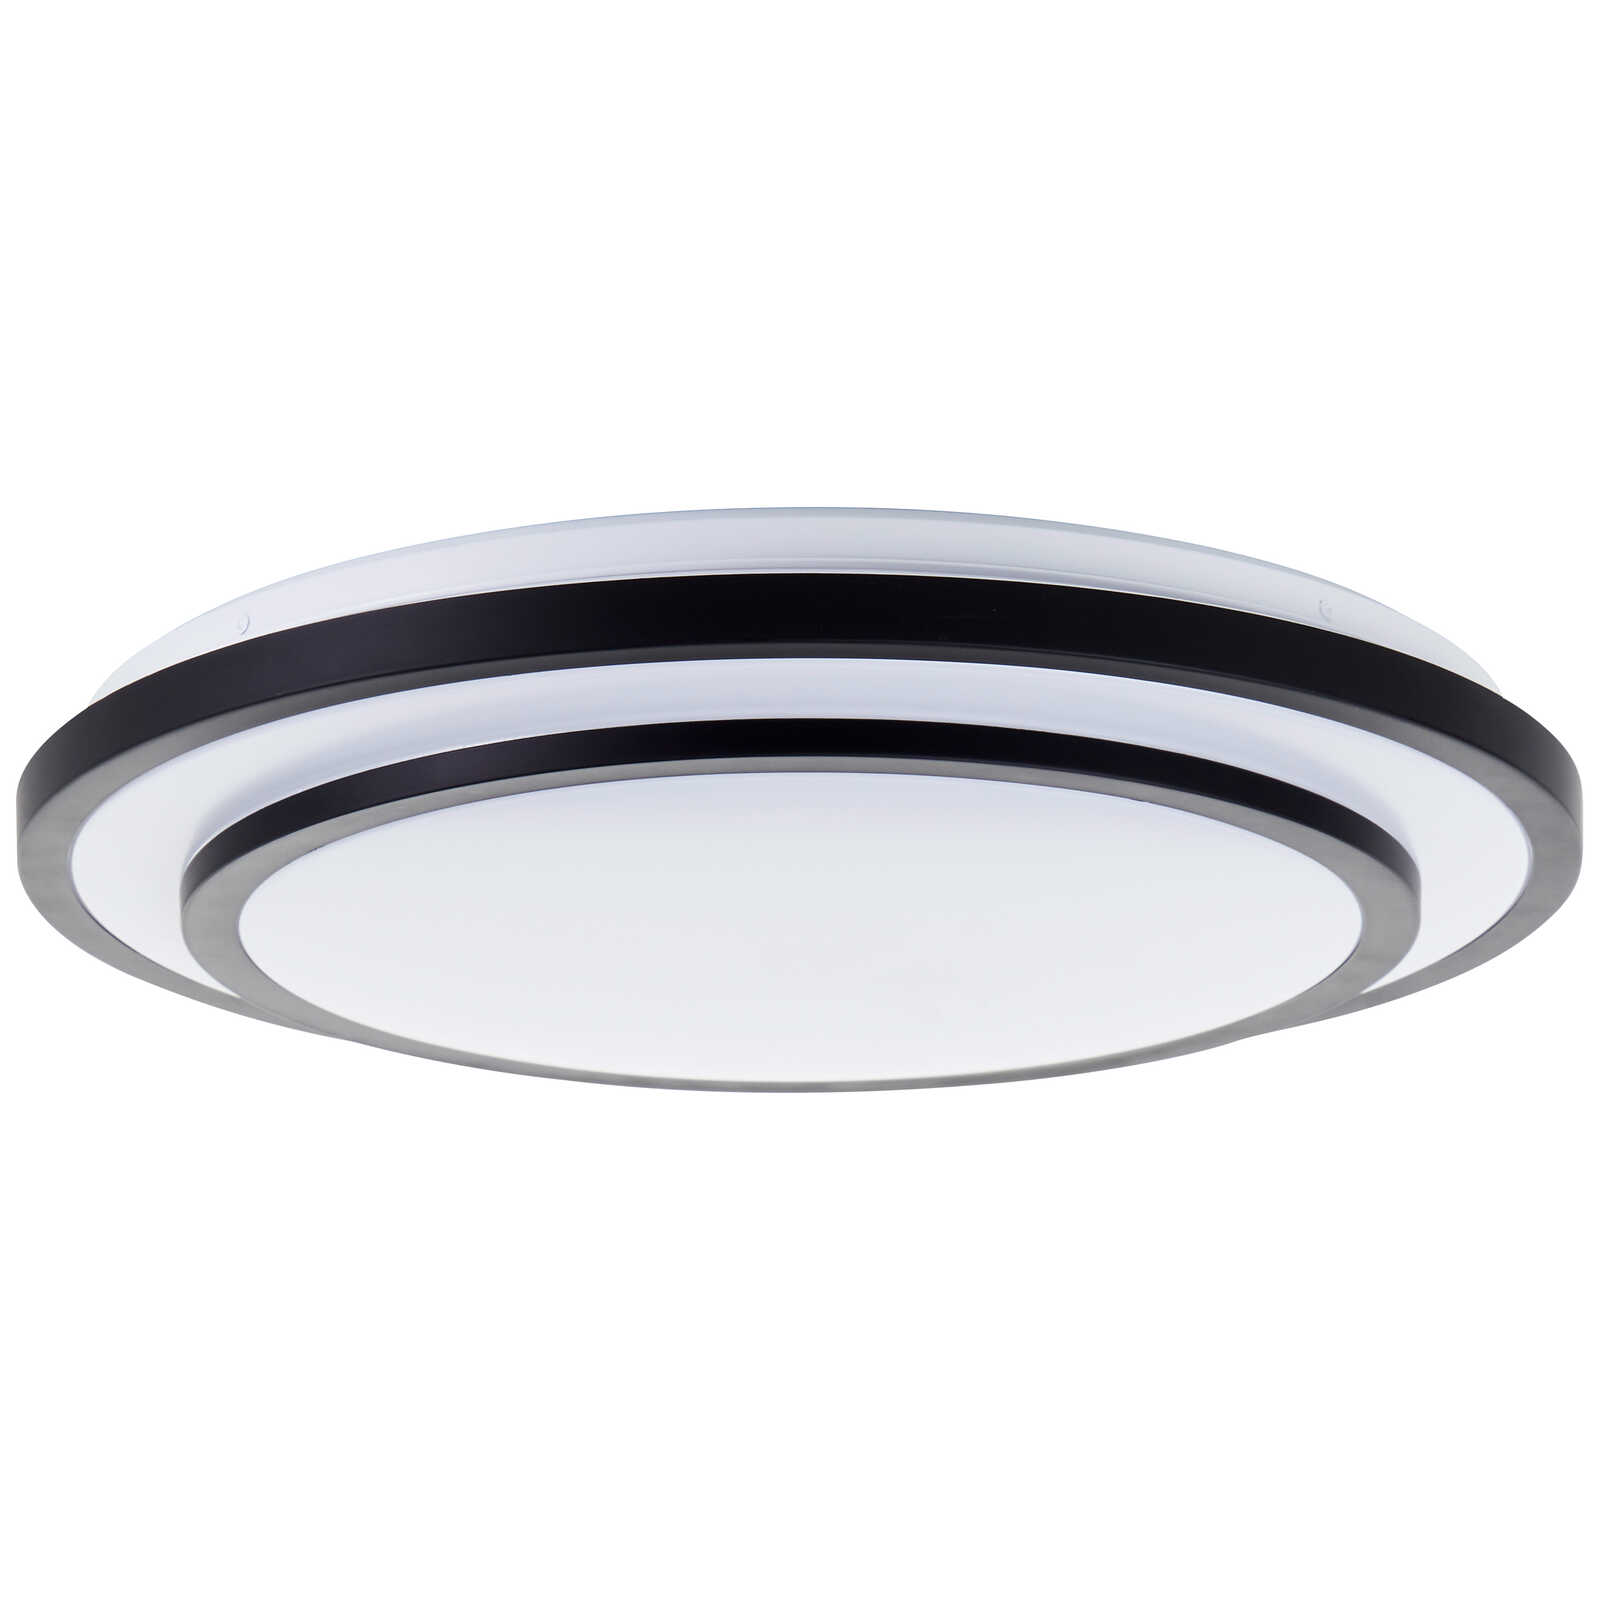             Metal wall and ceiling light - Leano - Black
        